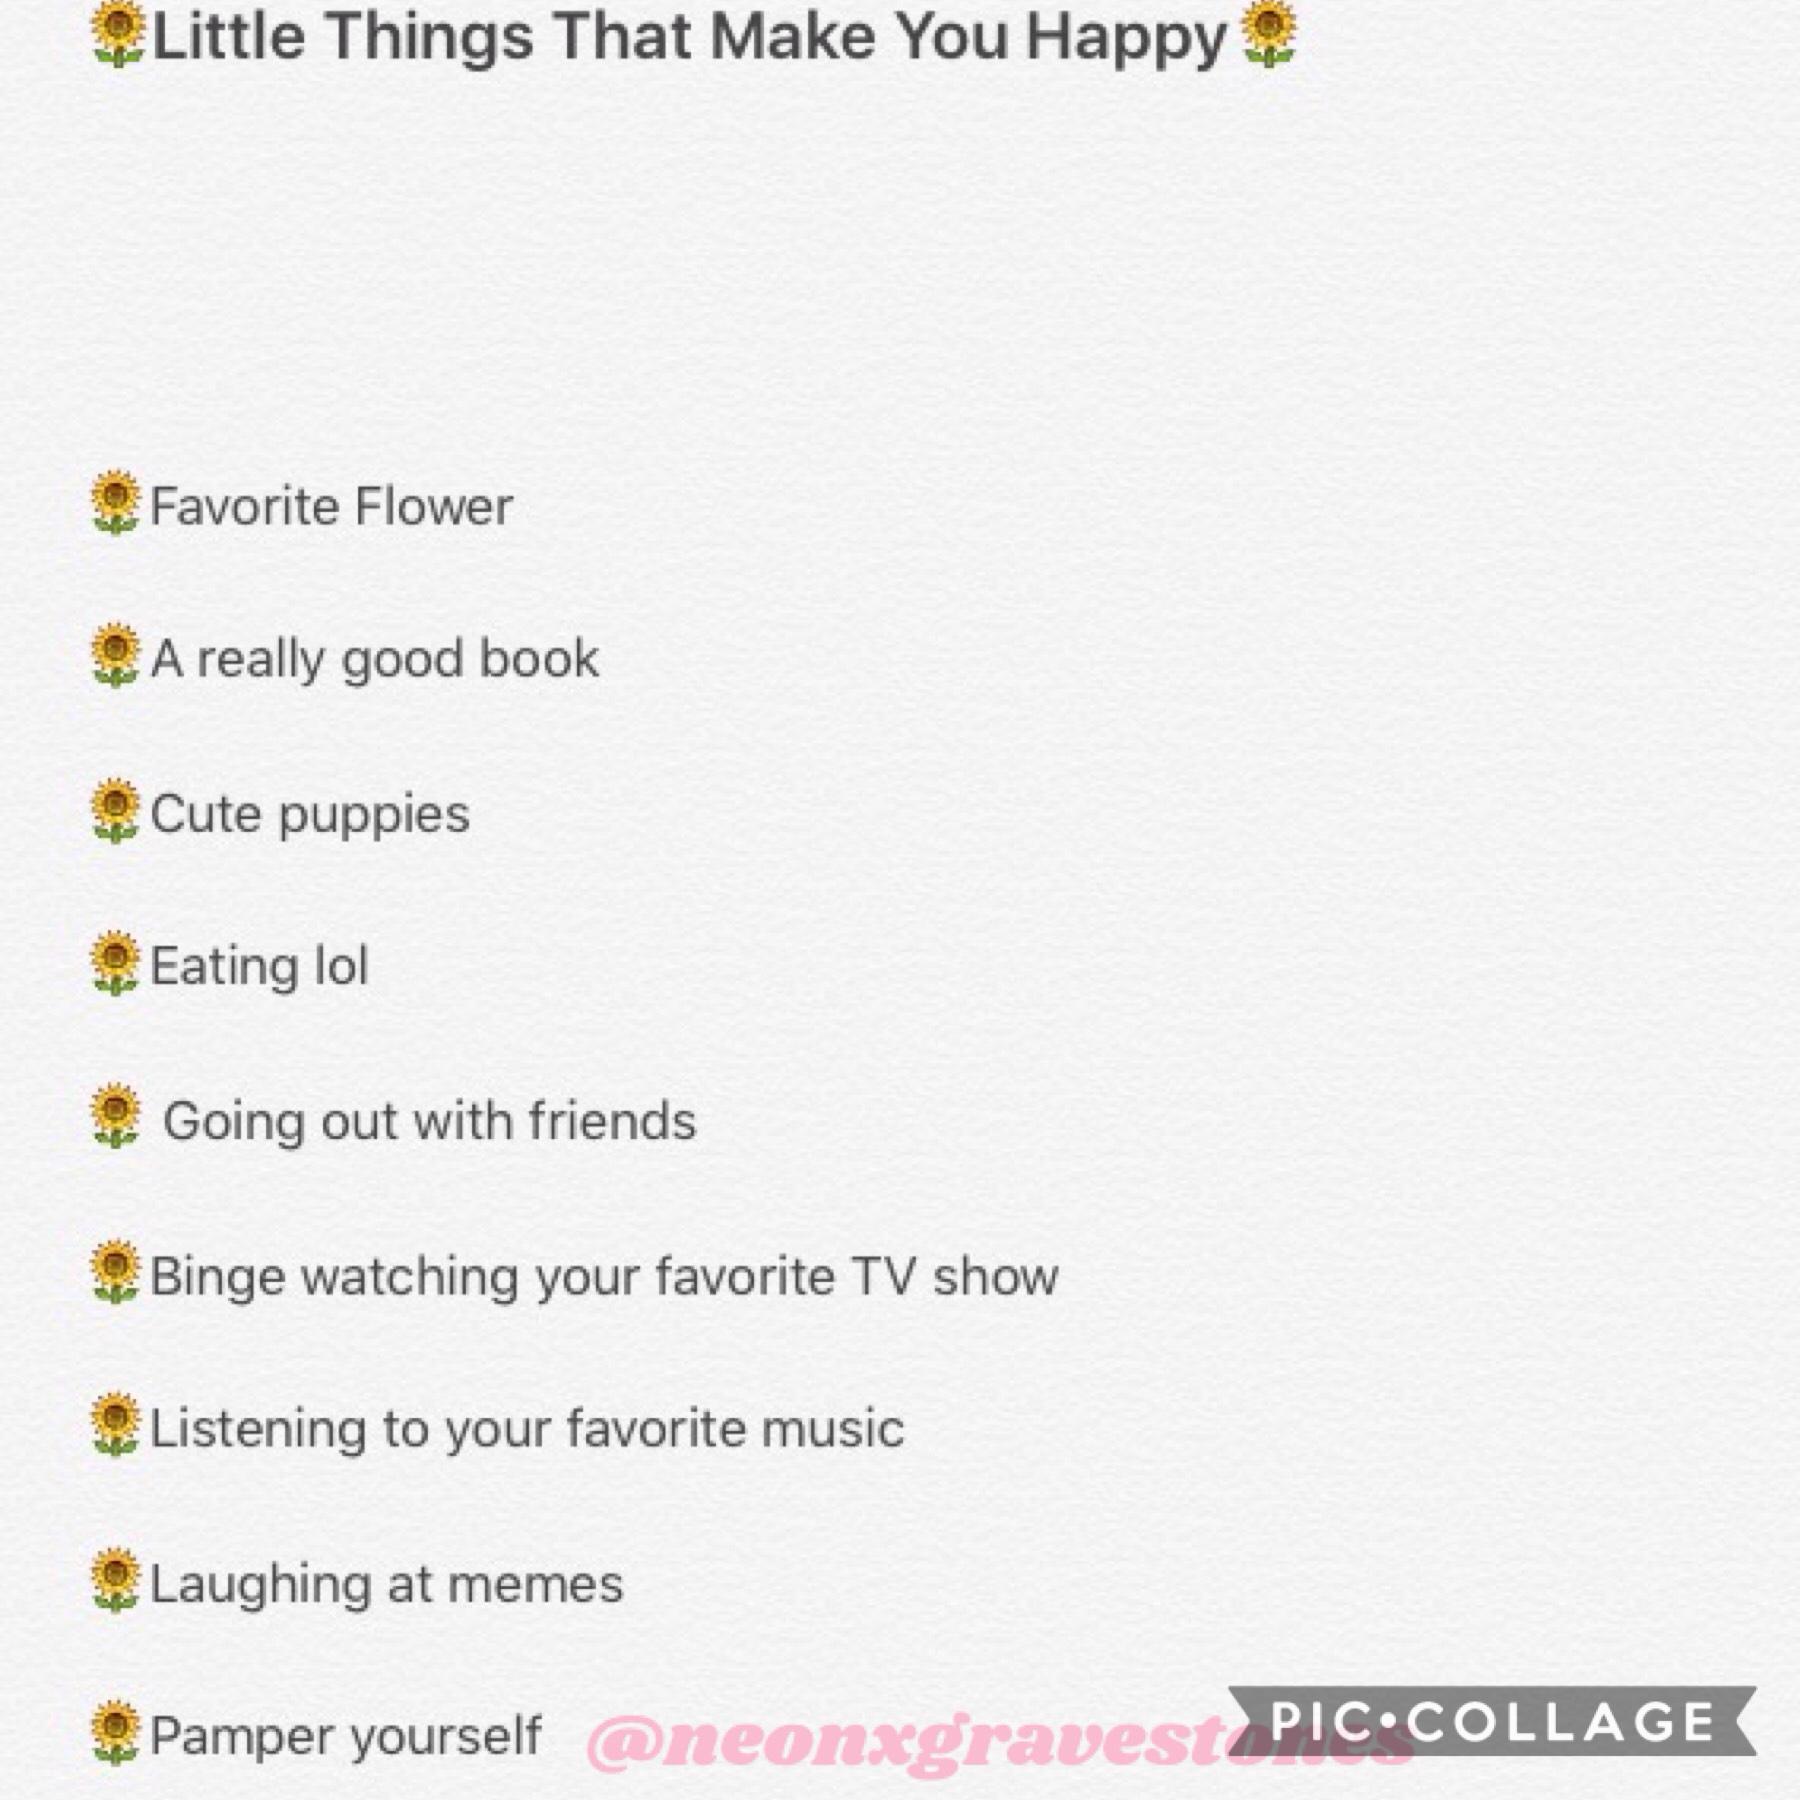 Tip Monday! Just some things that can make you happy 💕